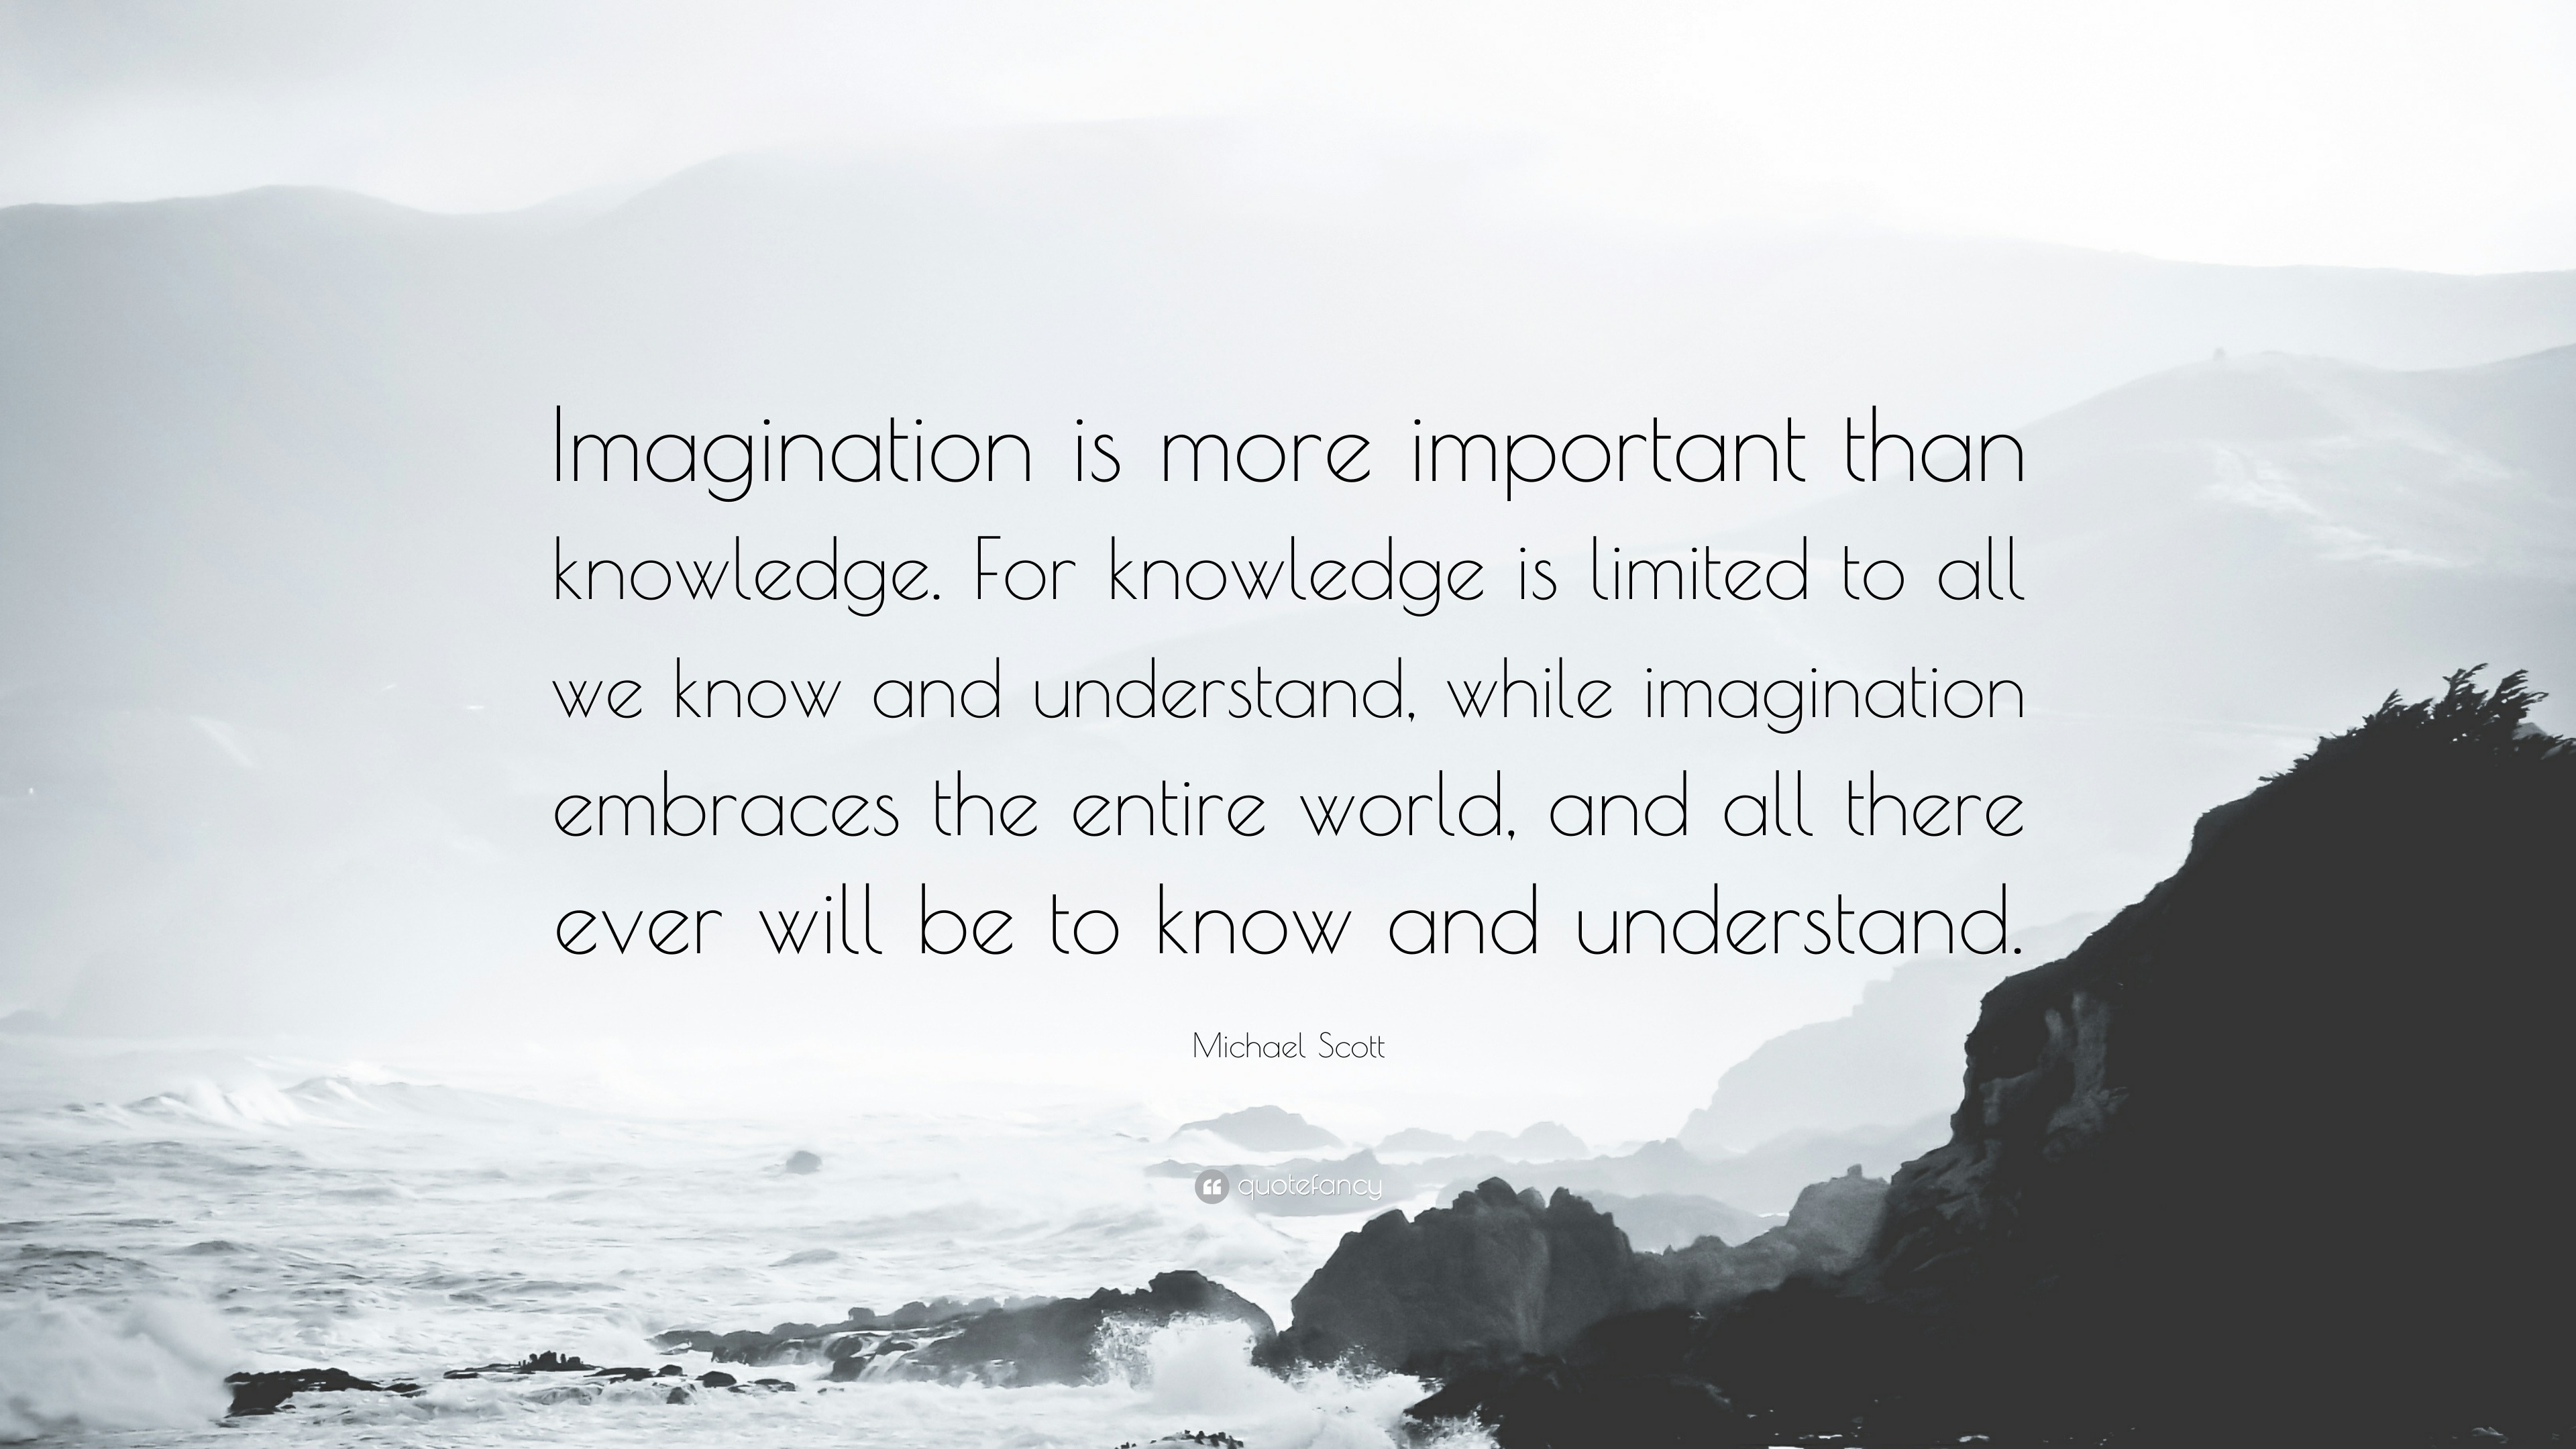 Michael Scott Quote: “Imagination is more important than knowledge. For